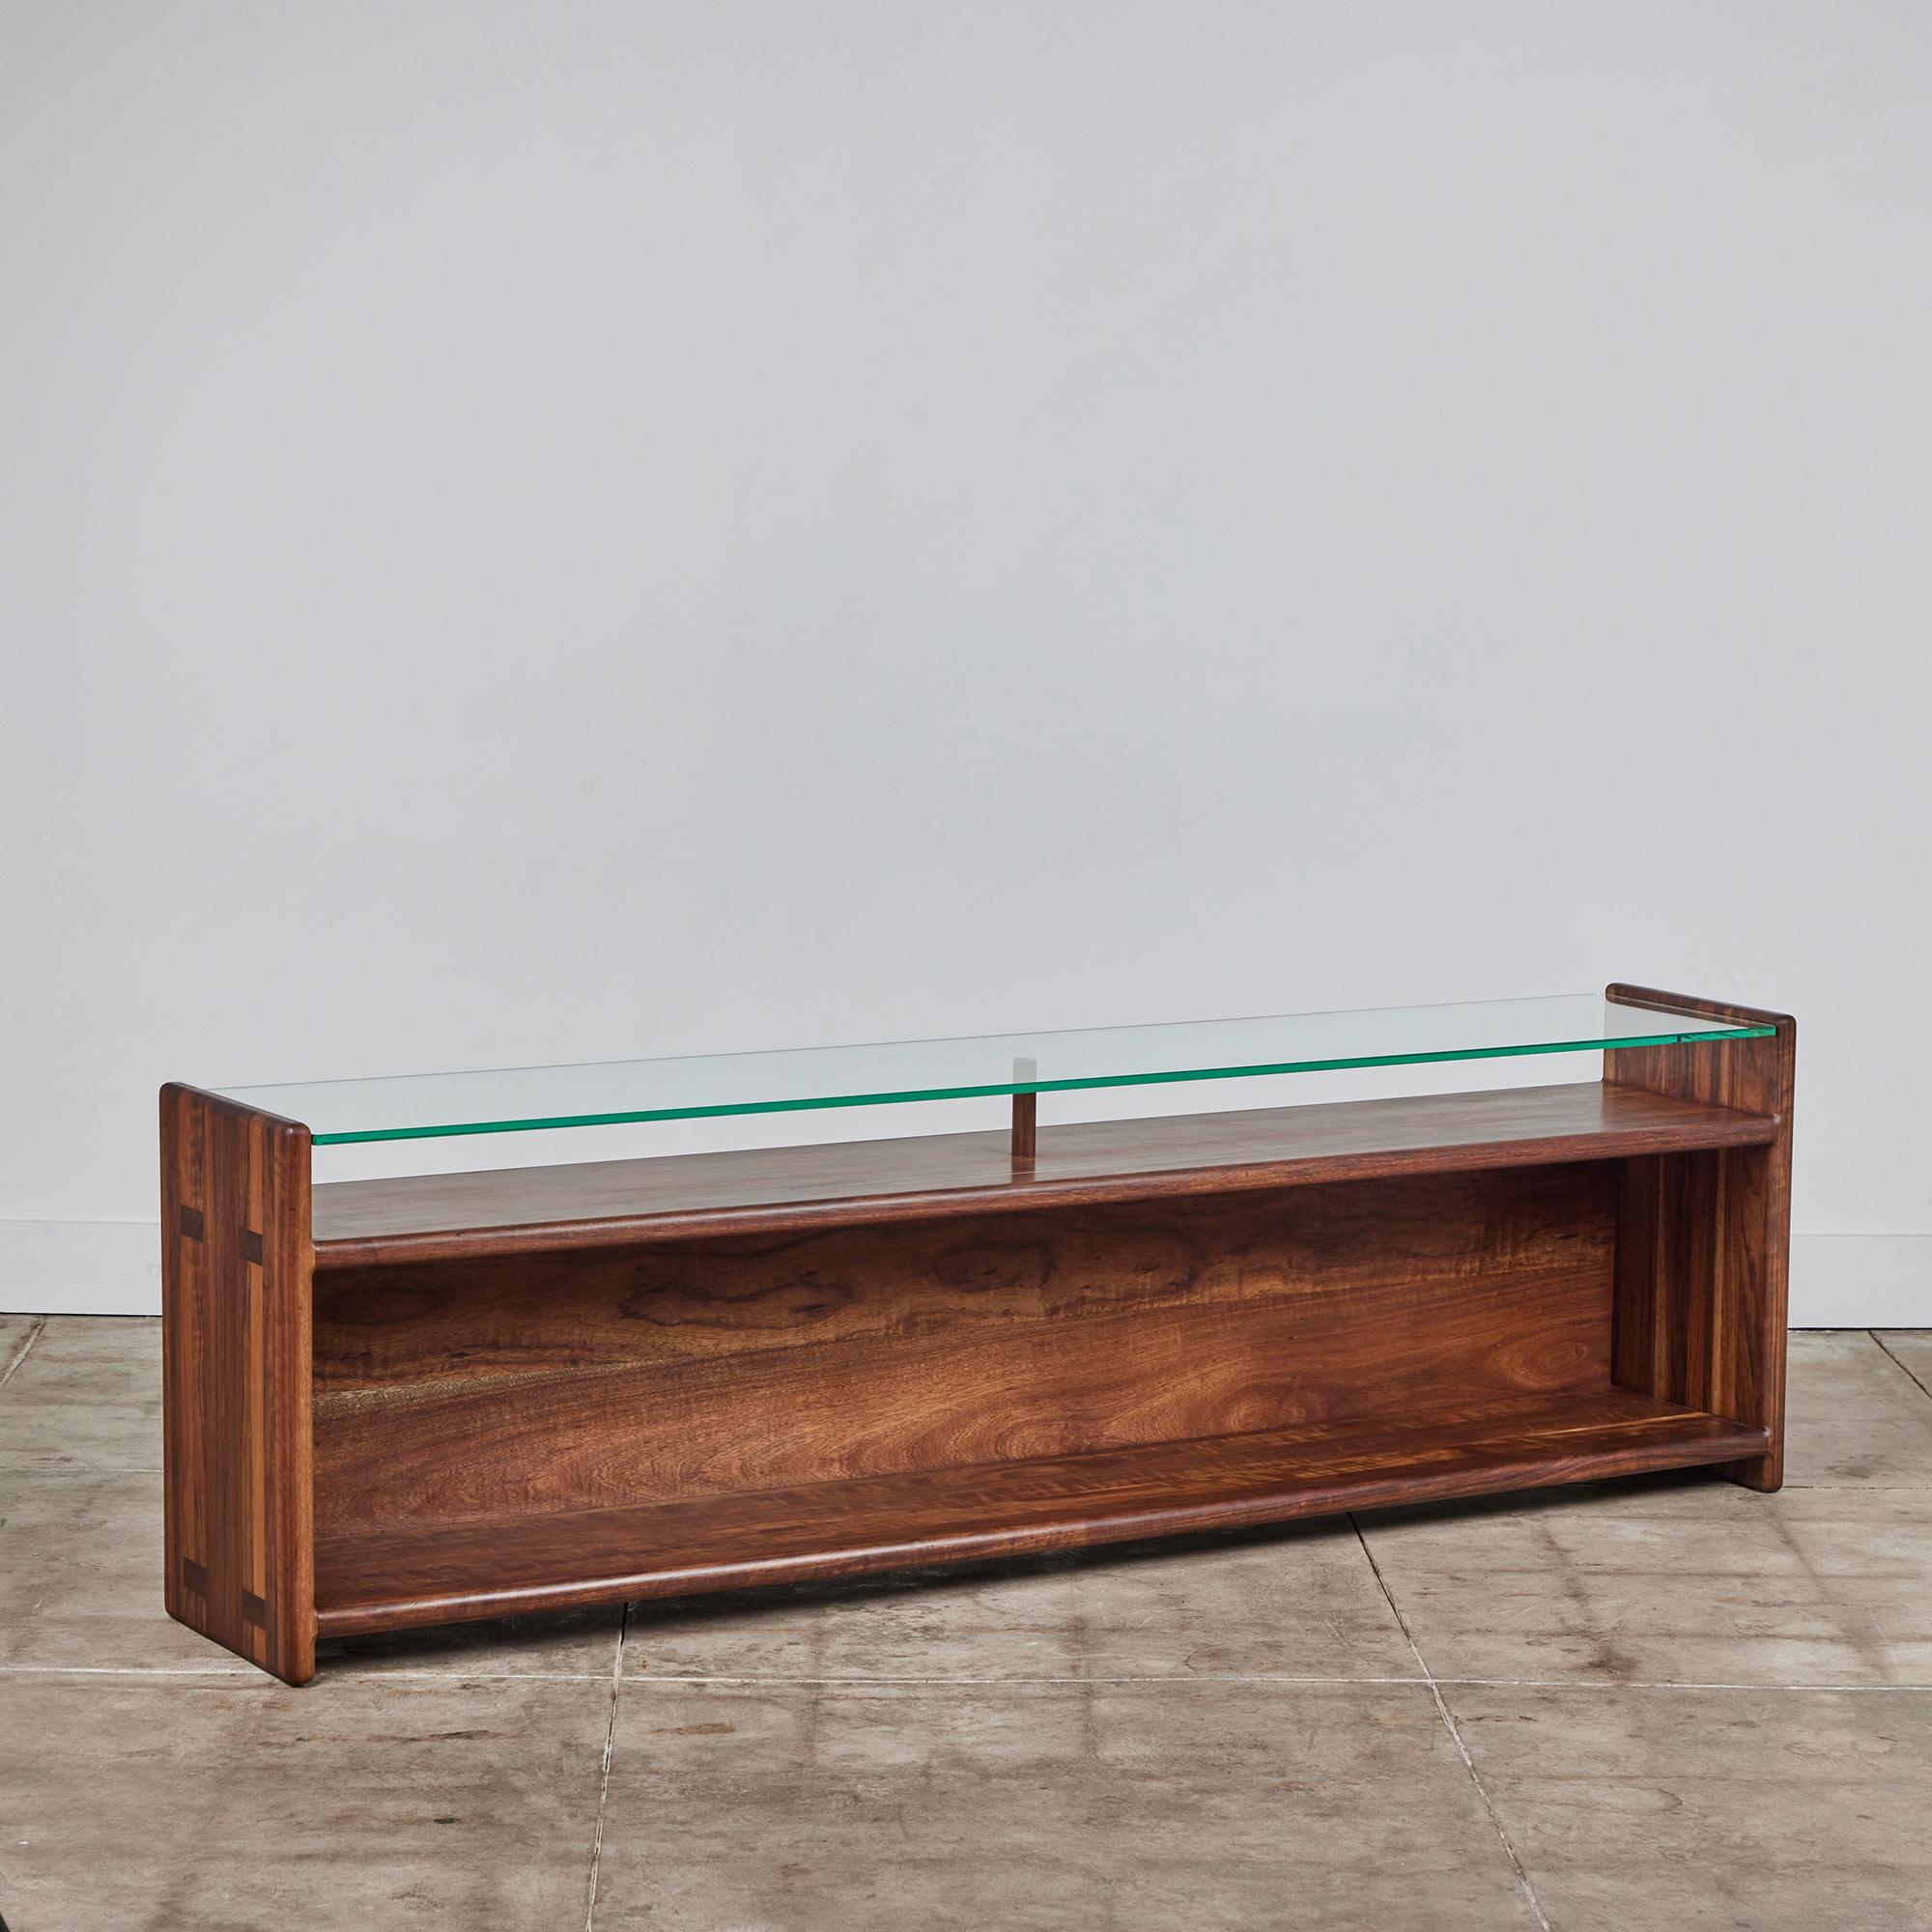 American made console table, circa 1970s, by Gerald McCabe is beautifully crafted from a solid slab of Shedua. The piece features natural wood grain variances with highs and lows. The top of this console showcases a glass top with a s shelf below